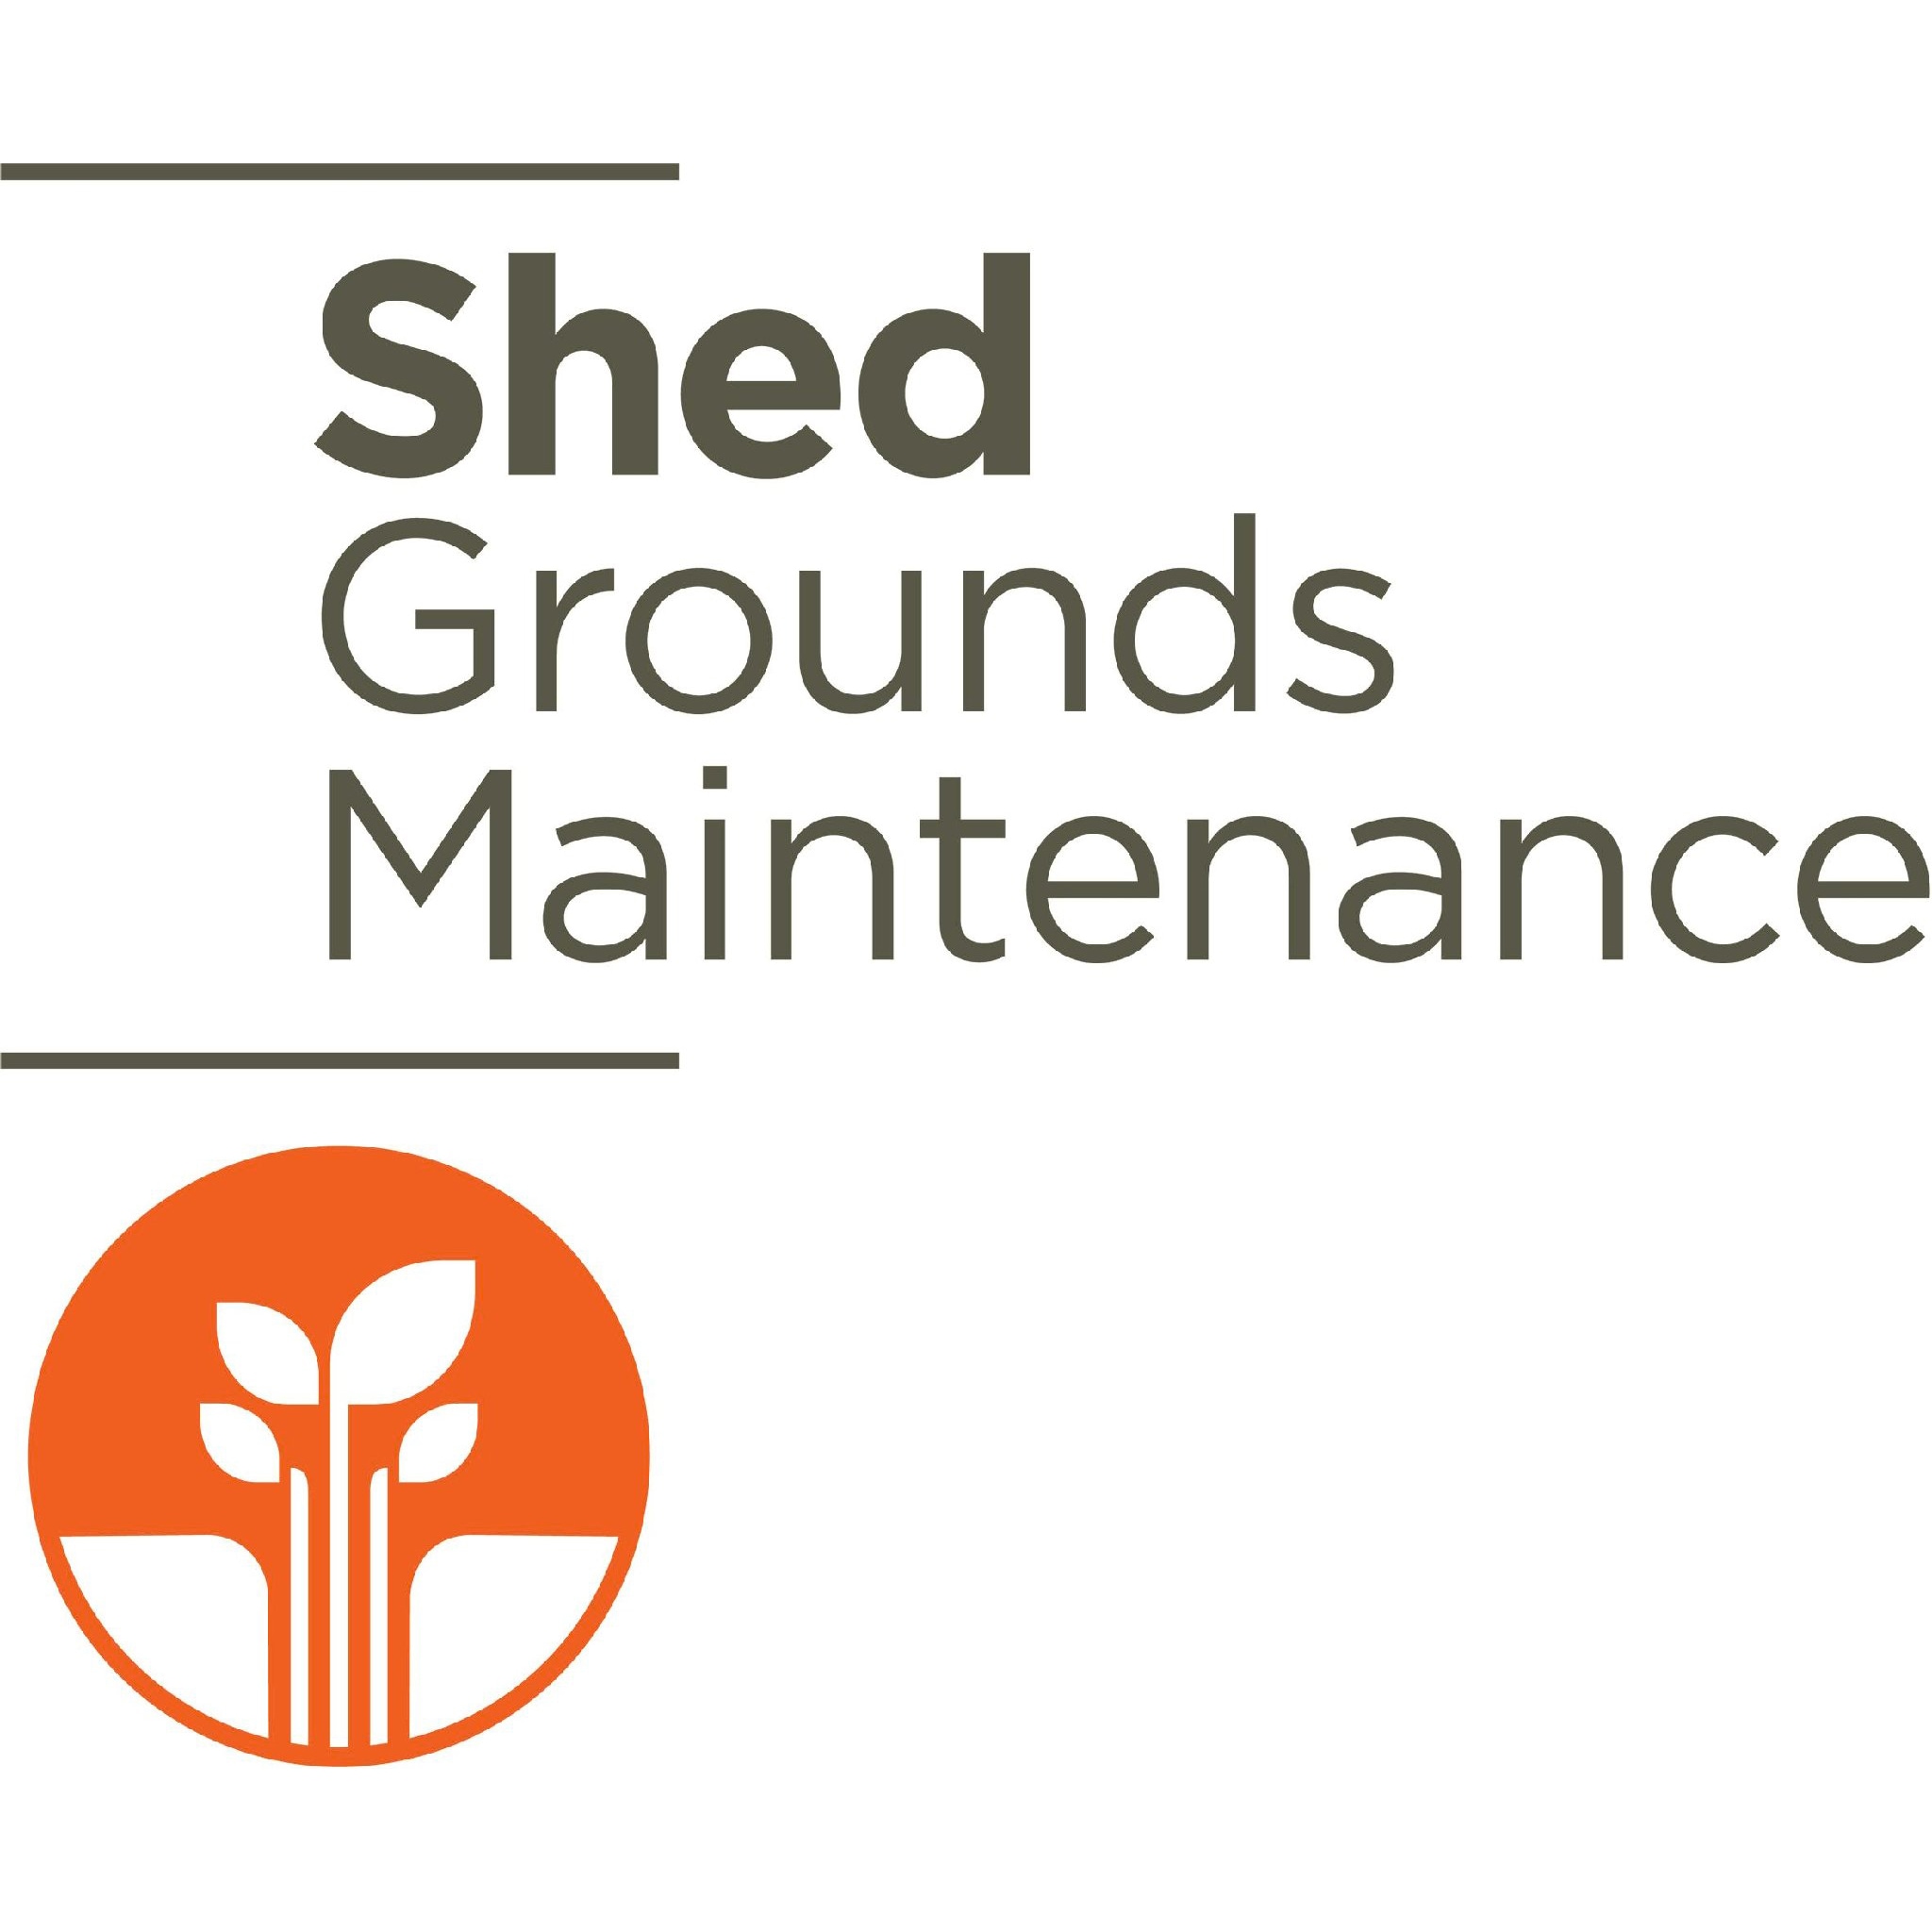 Fallstudie - Shed Grounds Maintenance